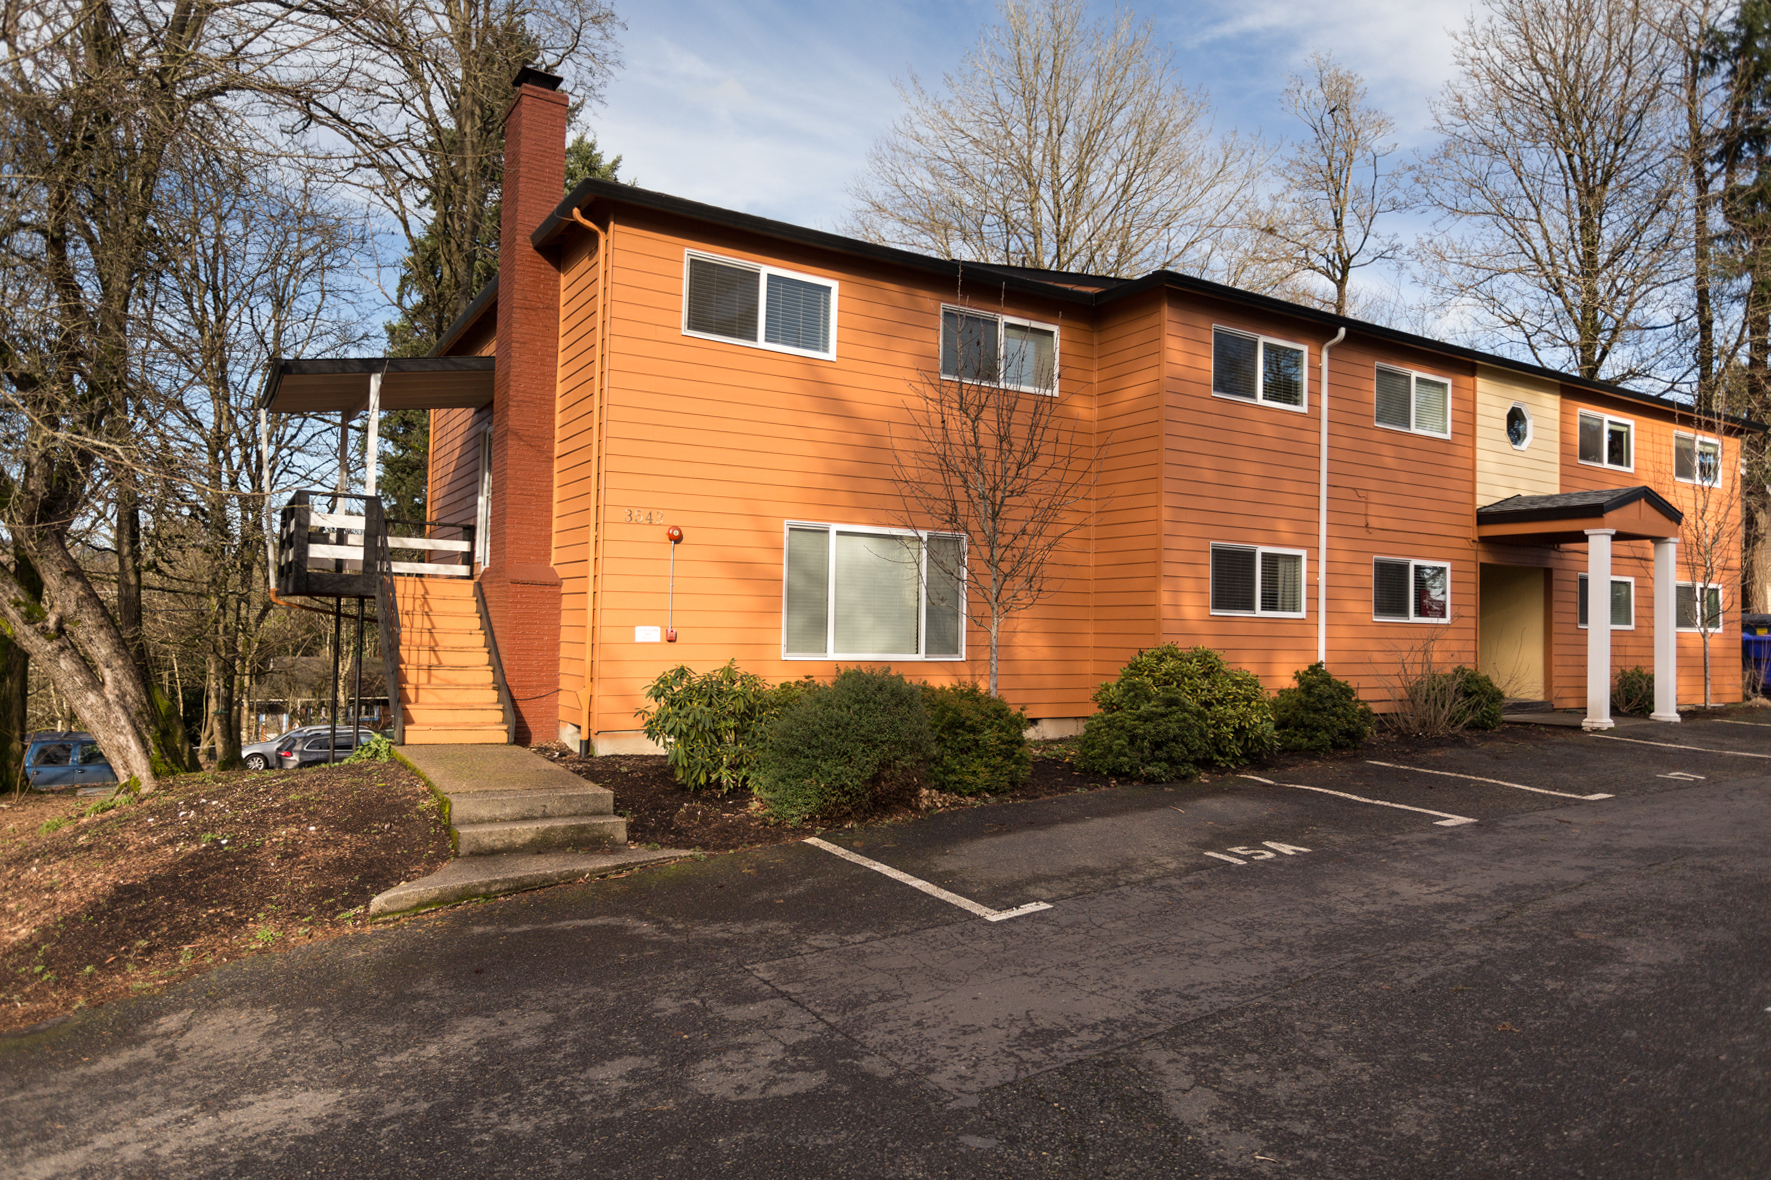 Sold for $195,000! 3543 SW Troy St. #17, Portland, OR 97219